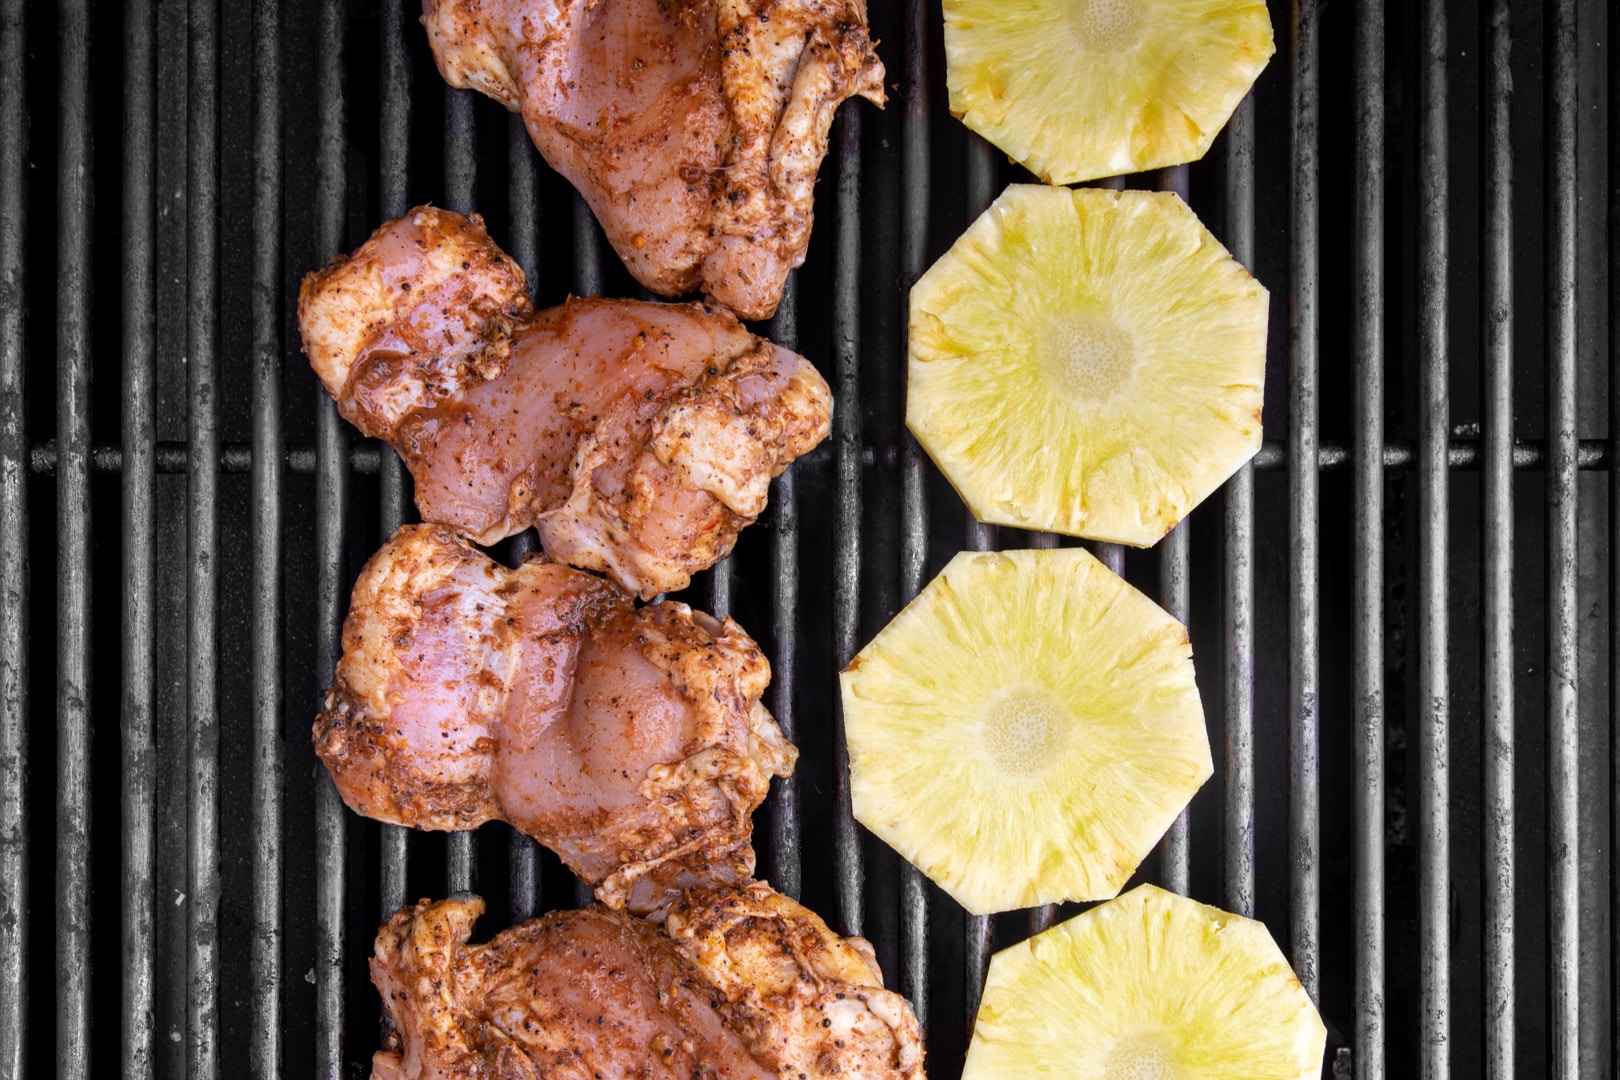 jerk marinated chicken and pineapple slices on a bbq